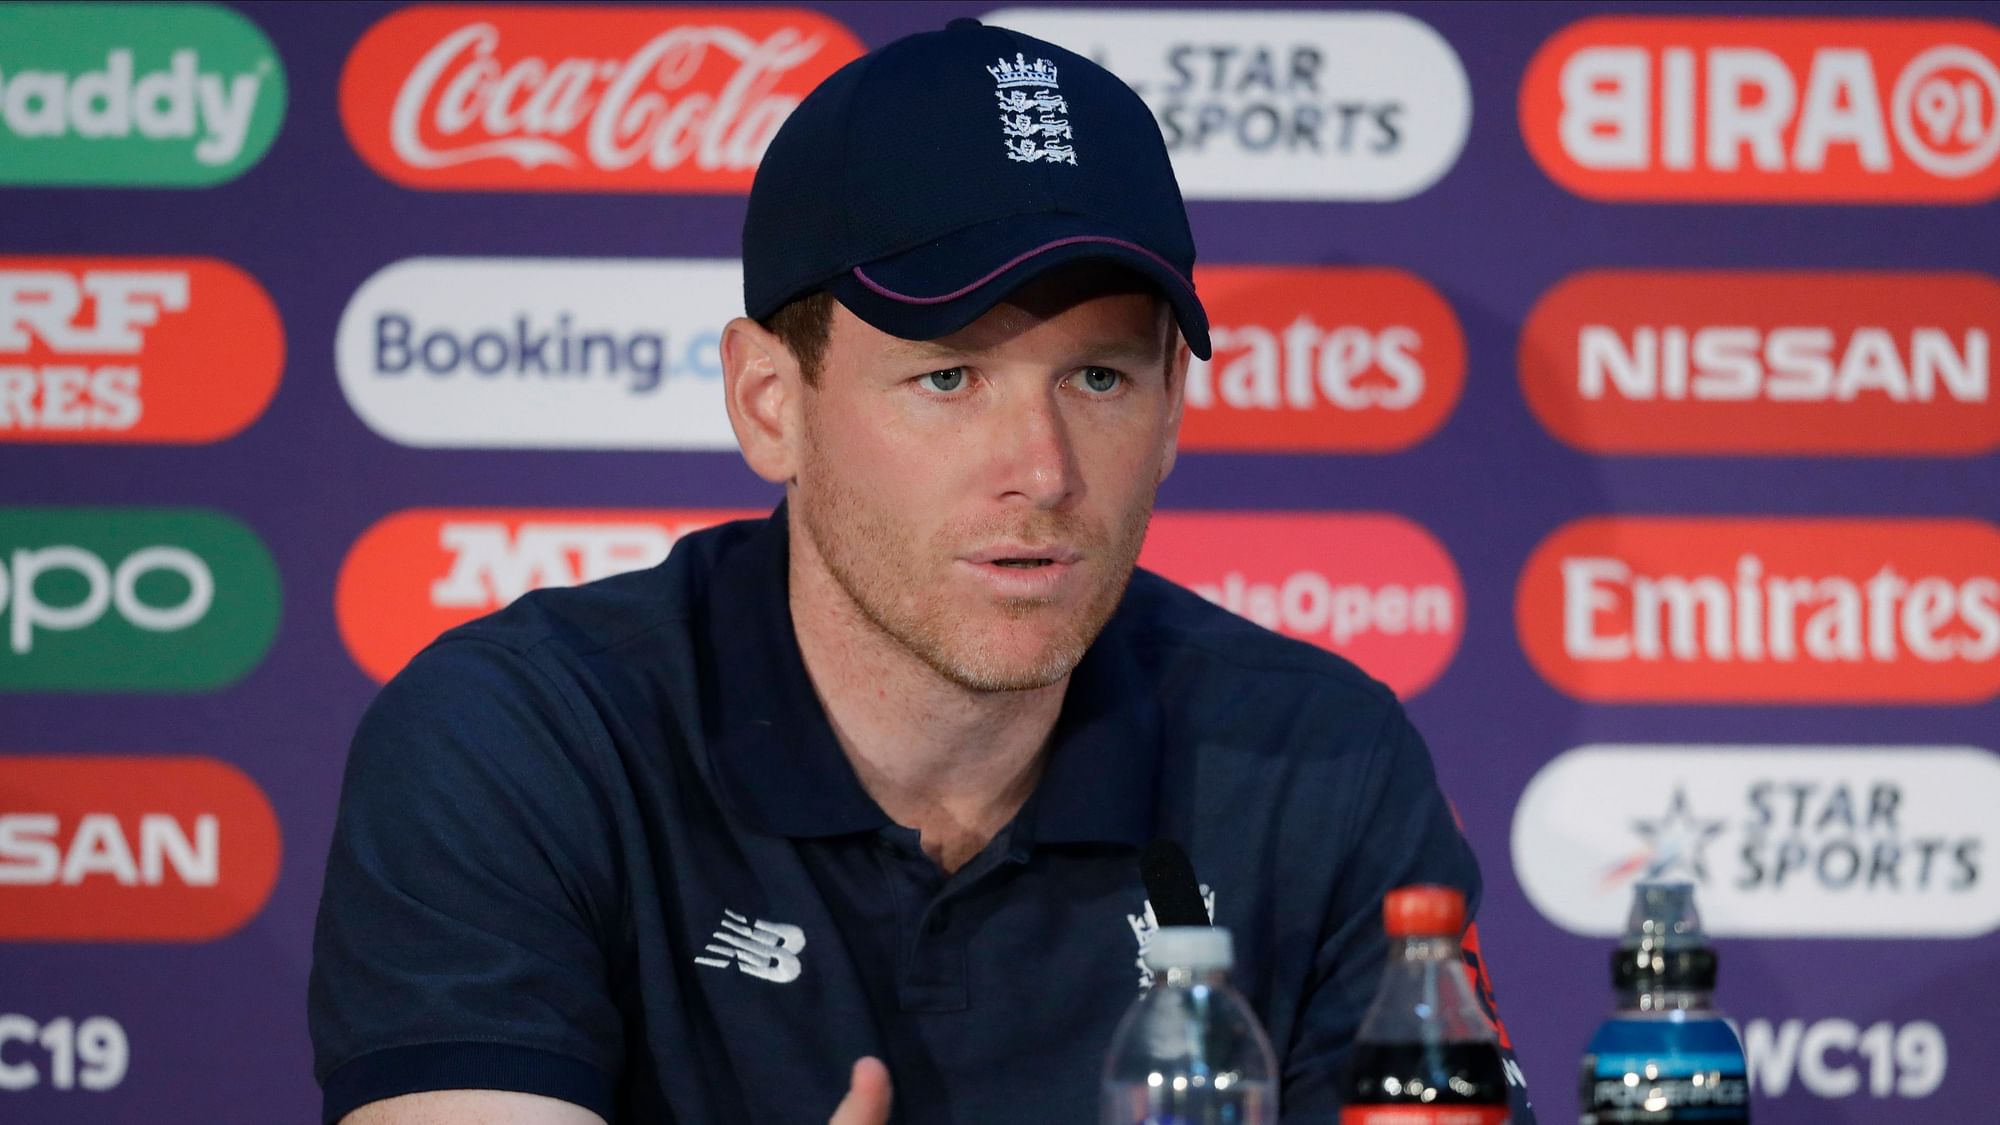 England captain Eoin Morgan understands if cricket fans aren’t willing to forgive Steve Smith and David Warner.